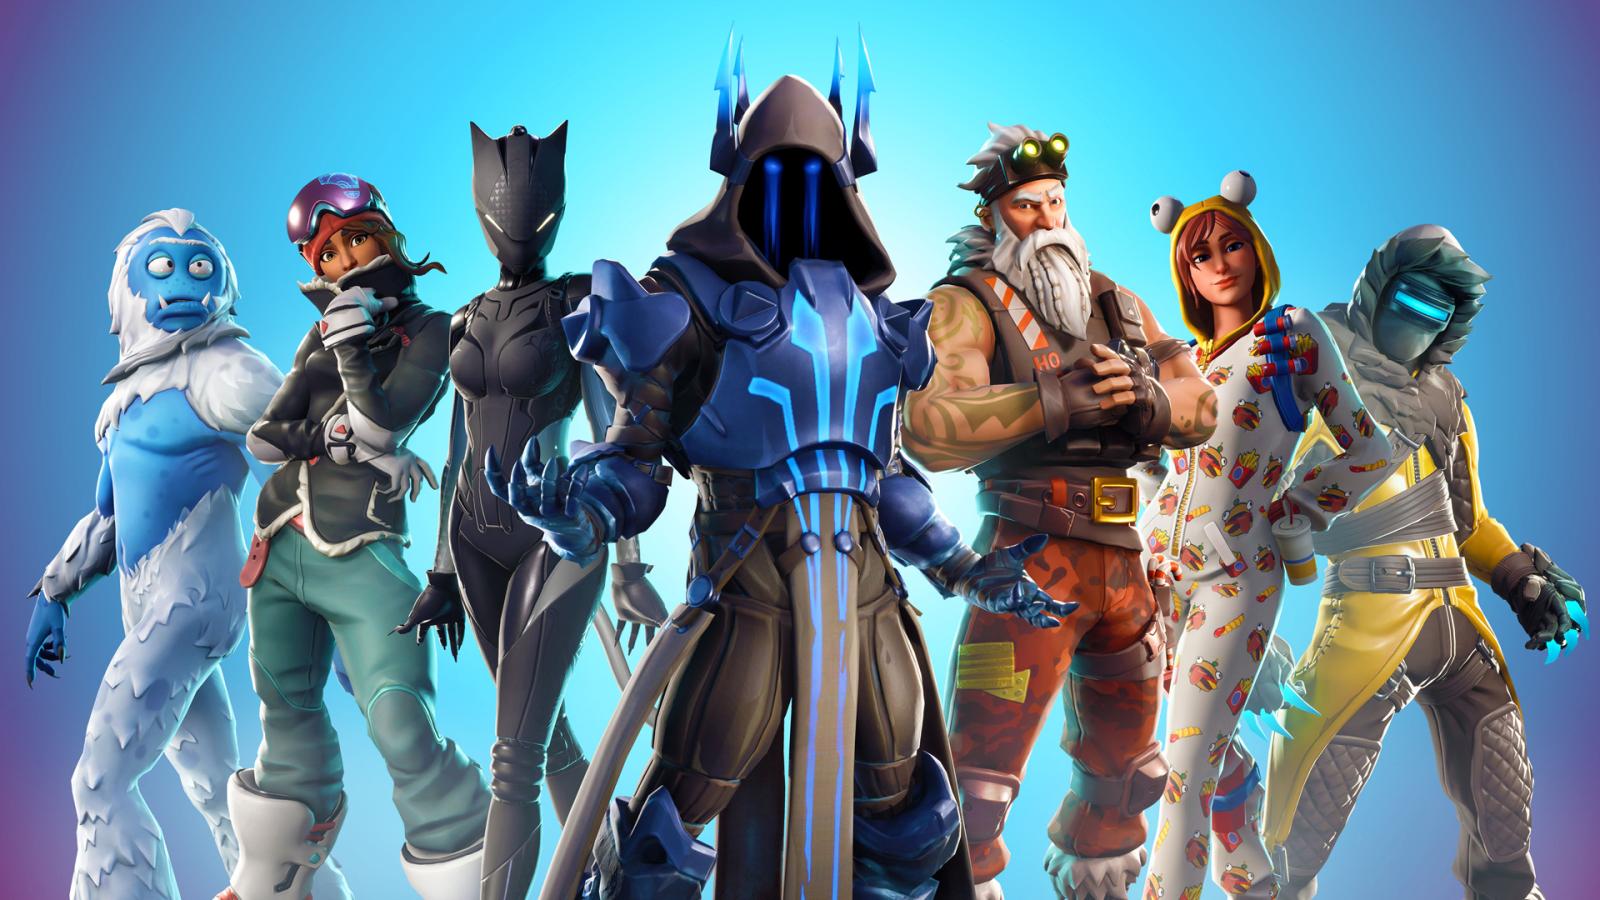 Playing Fortnite in Co-Op Can Enhance Prosocial Behaviors in Gamers